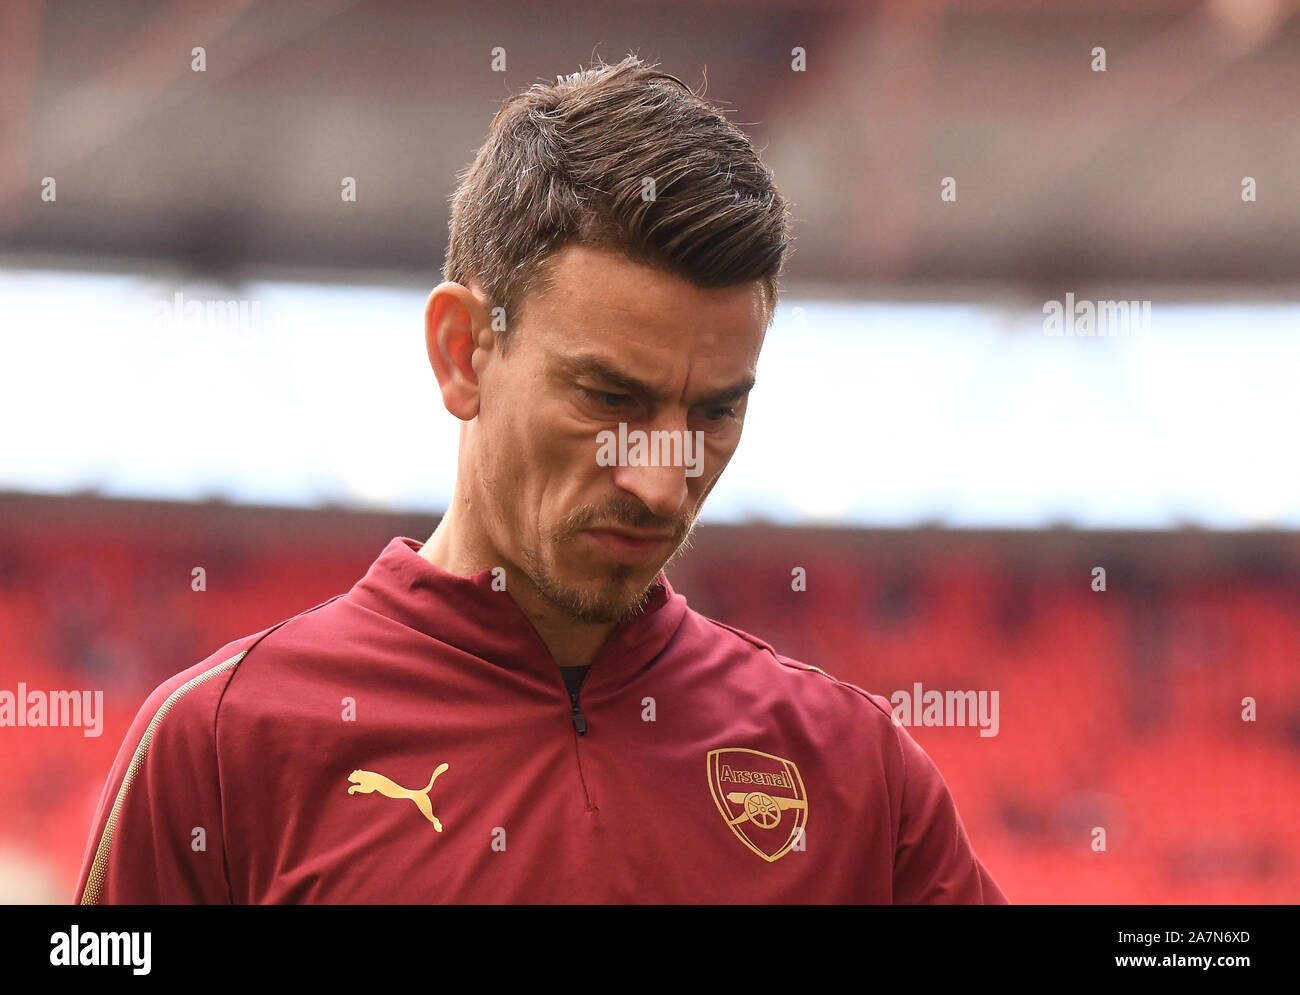 LONDON, ENGLAND - MARCH 2, 2019: pictured during the 2018/19 Premier League game between Tottenham Hotspur and Arsenal FC at Wembley Stadium. Stock Photo